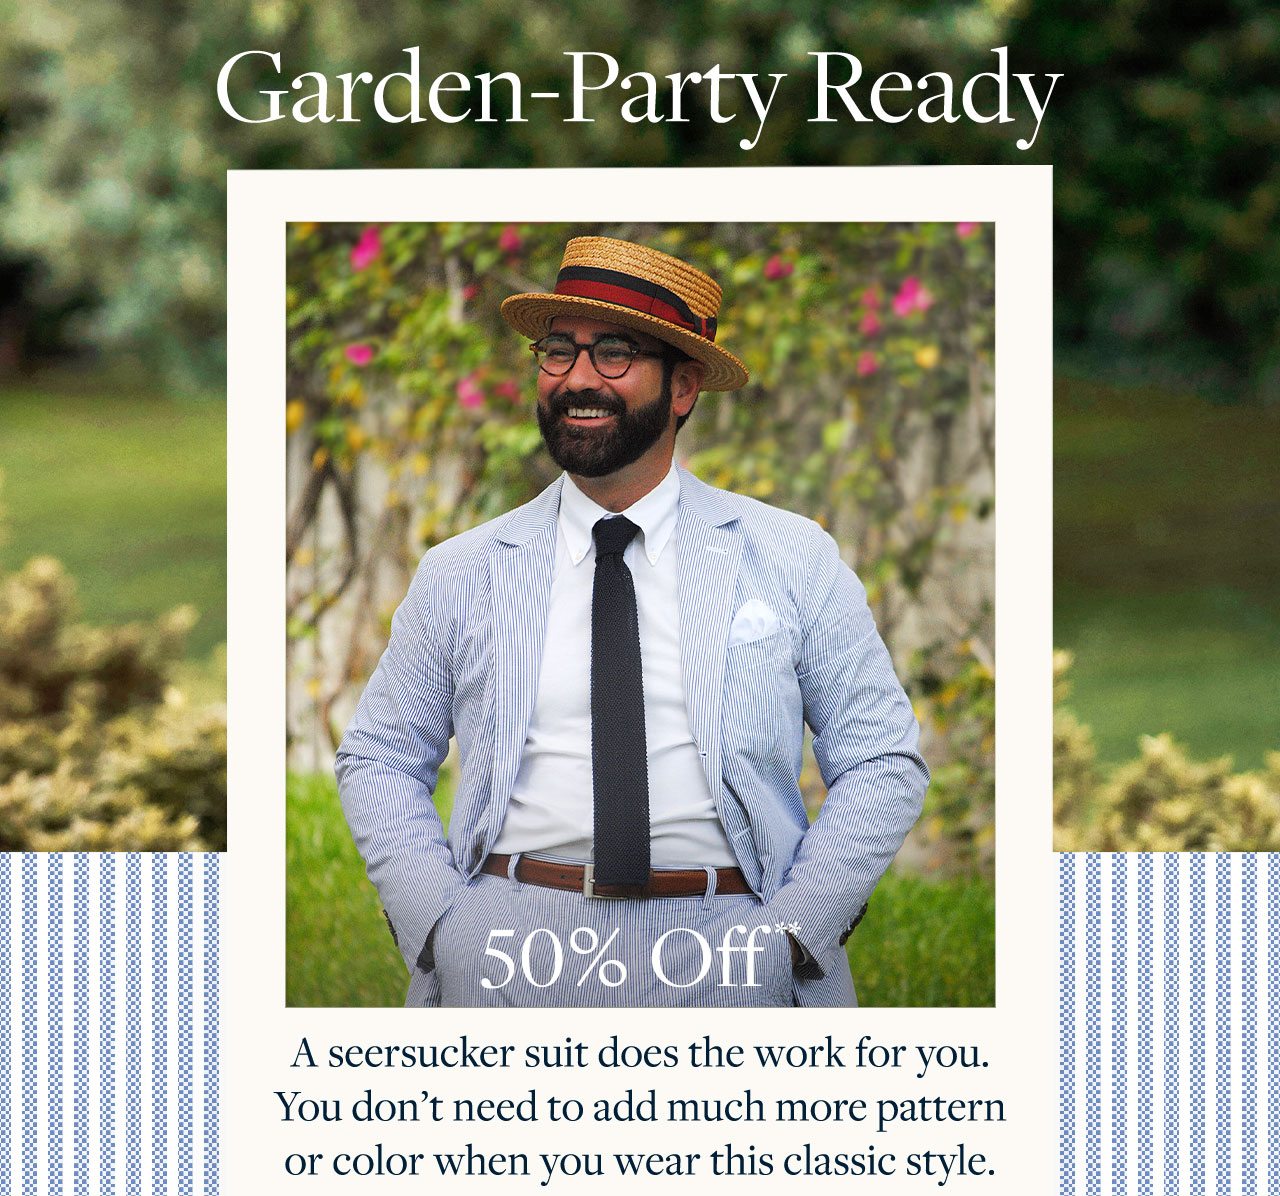 Garden-Party Ready 50% Off A seersucker suit does the work for you. You don't need to add much more pattern or color when you wear this classic style.